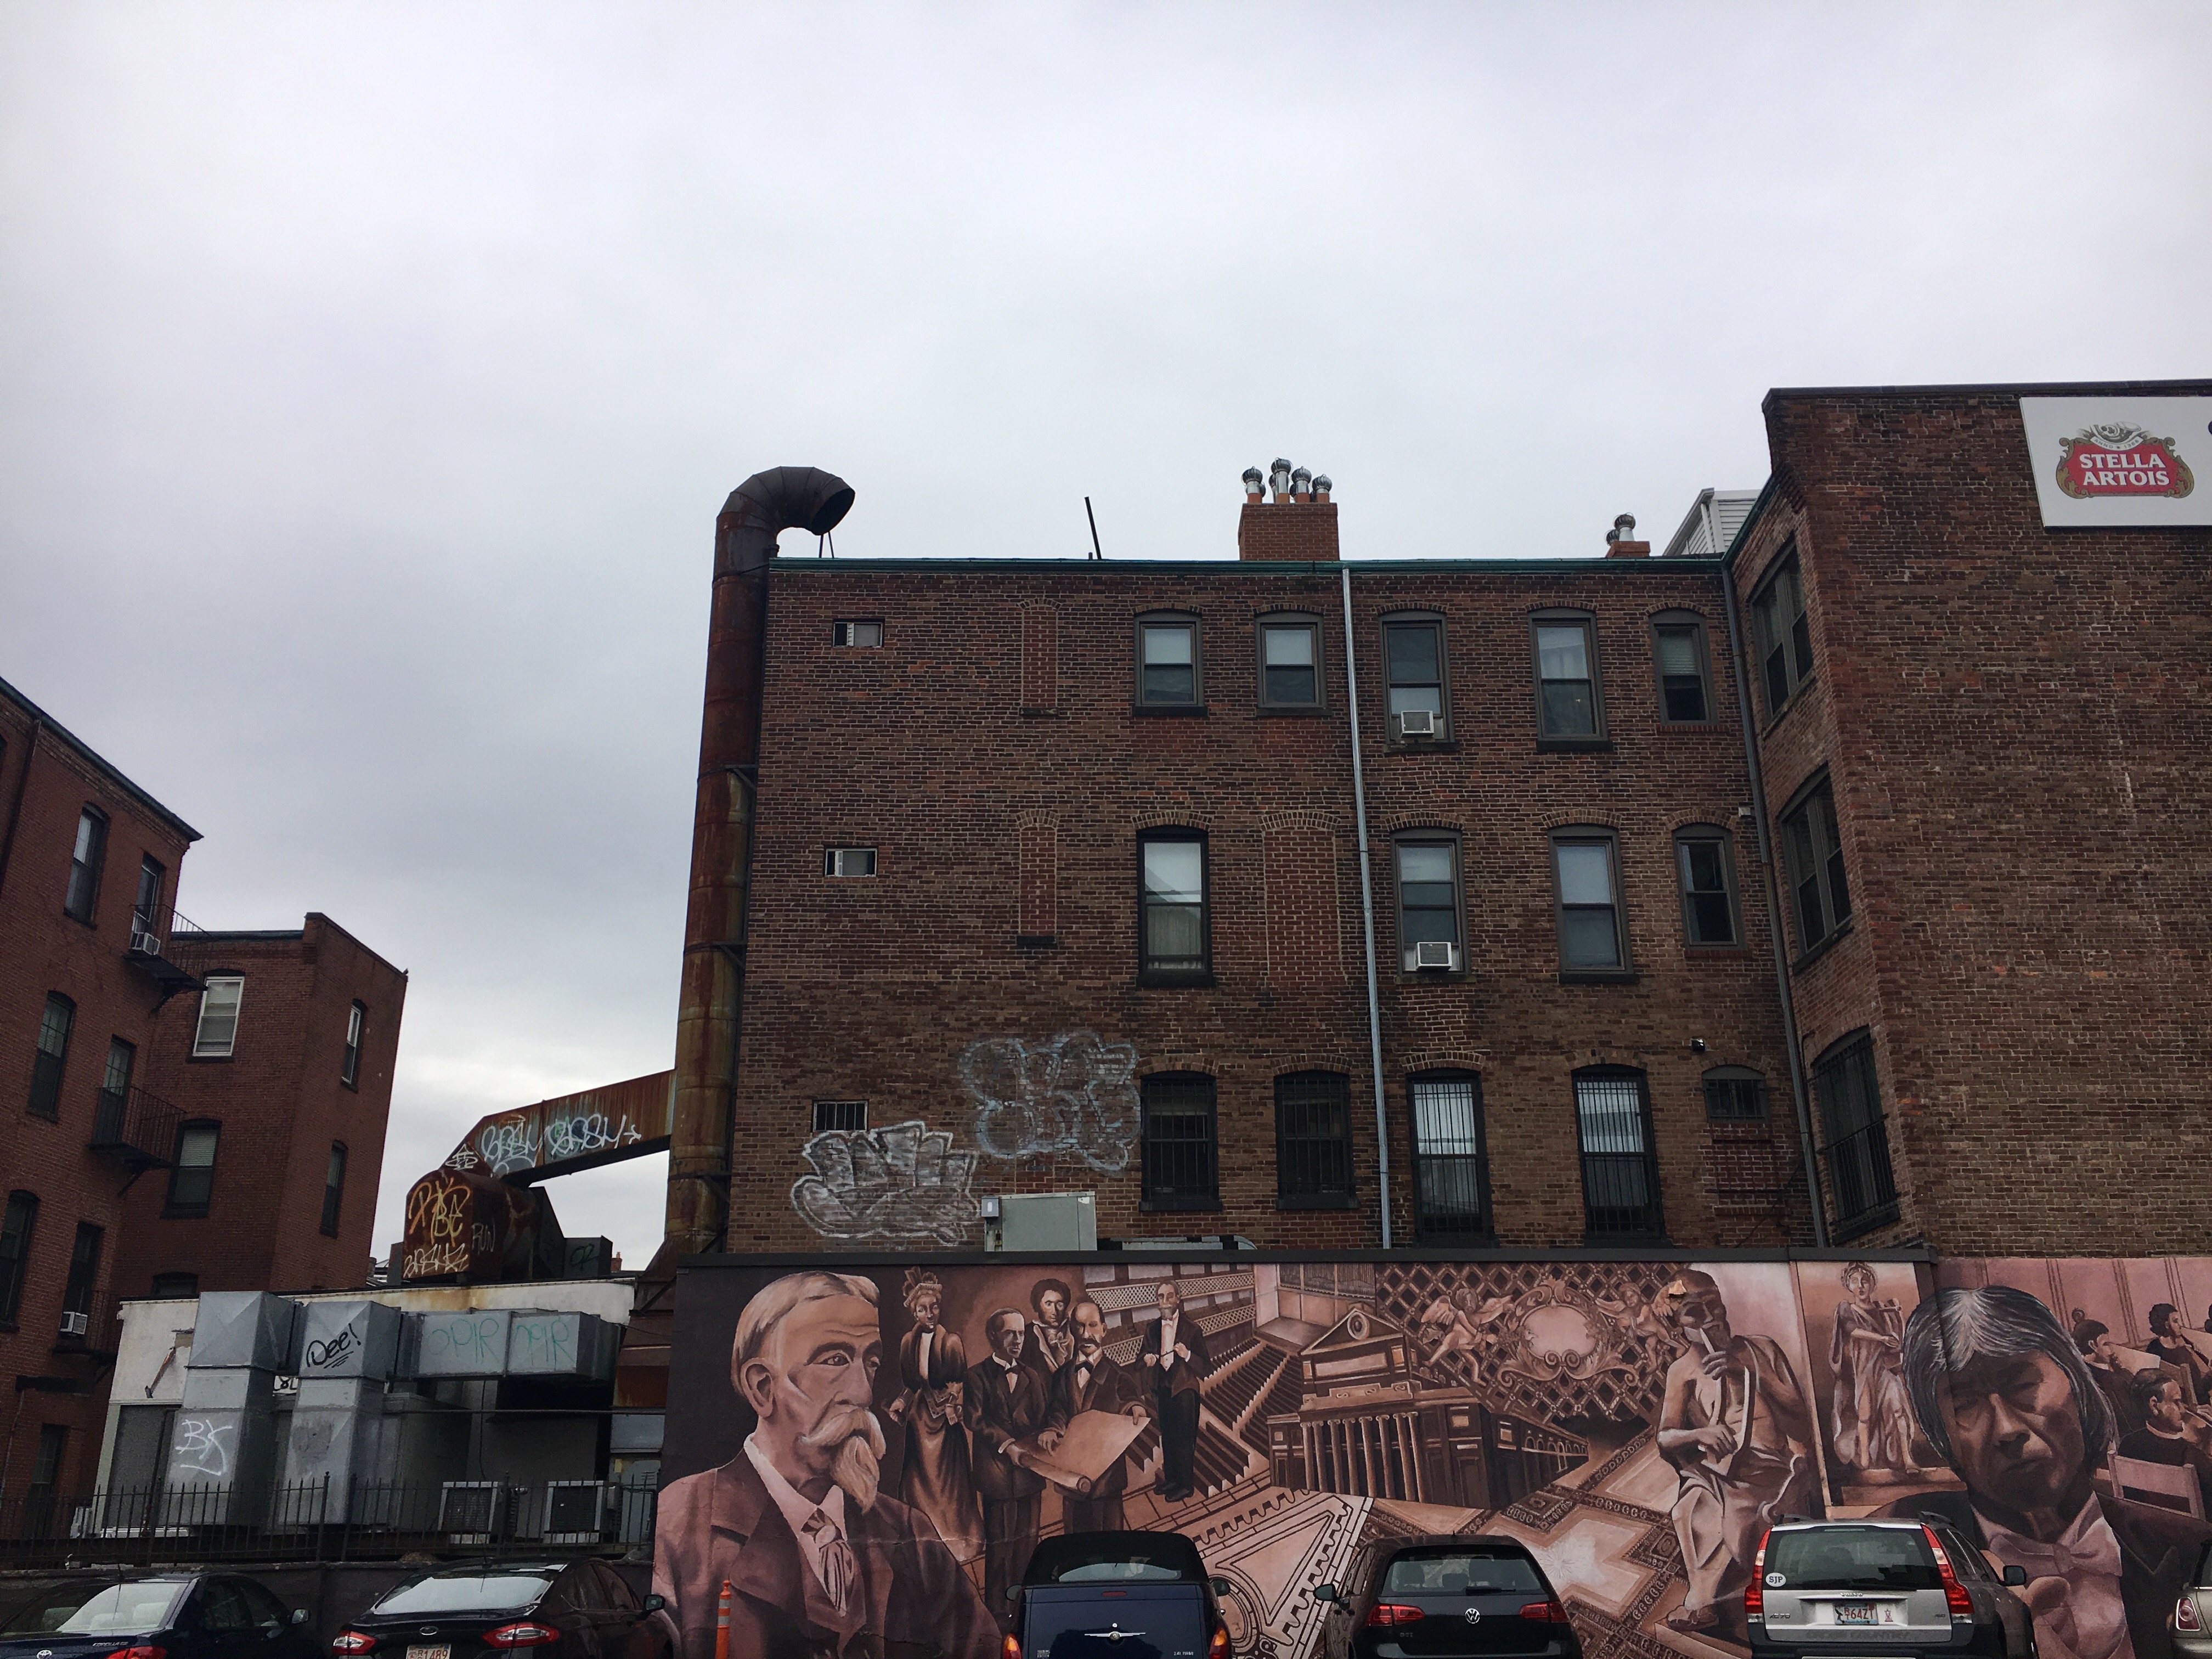 This mural in the Symphony area of Boston is located on the same street as the Boston POPS.